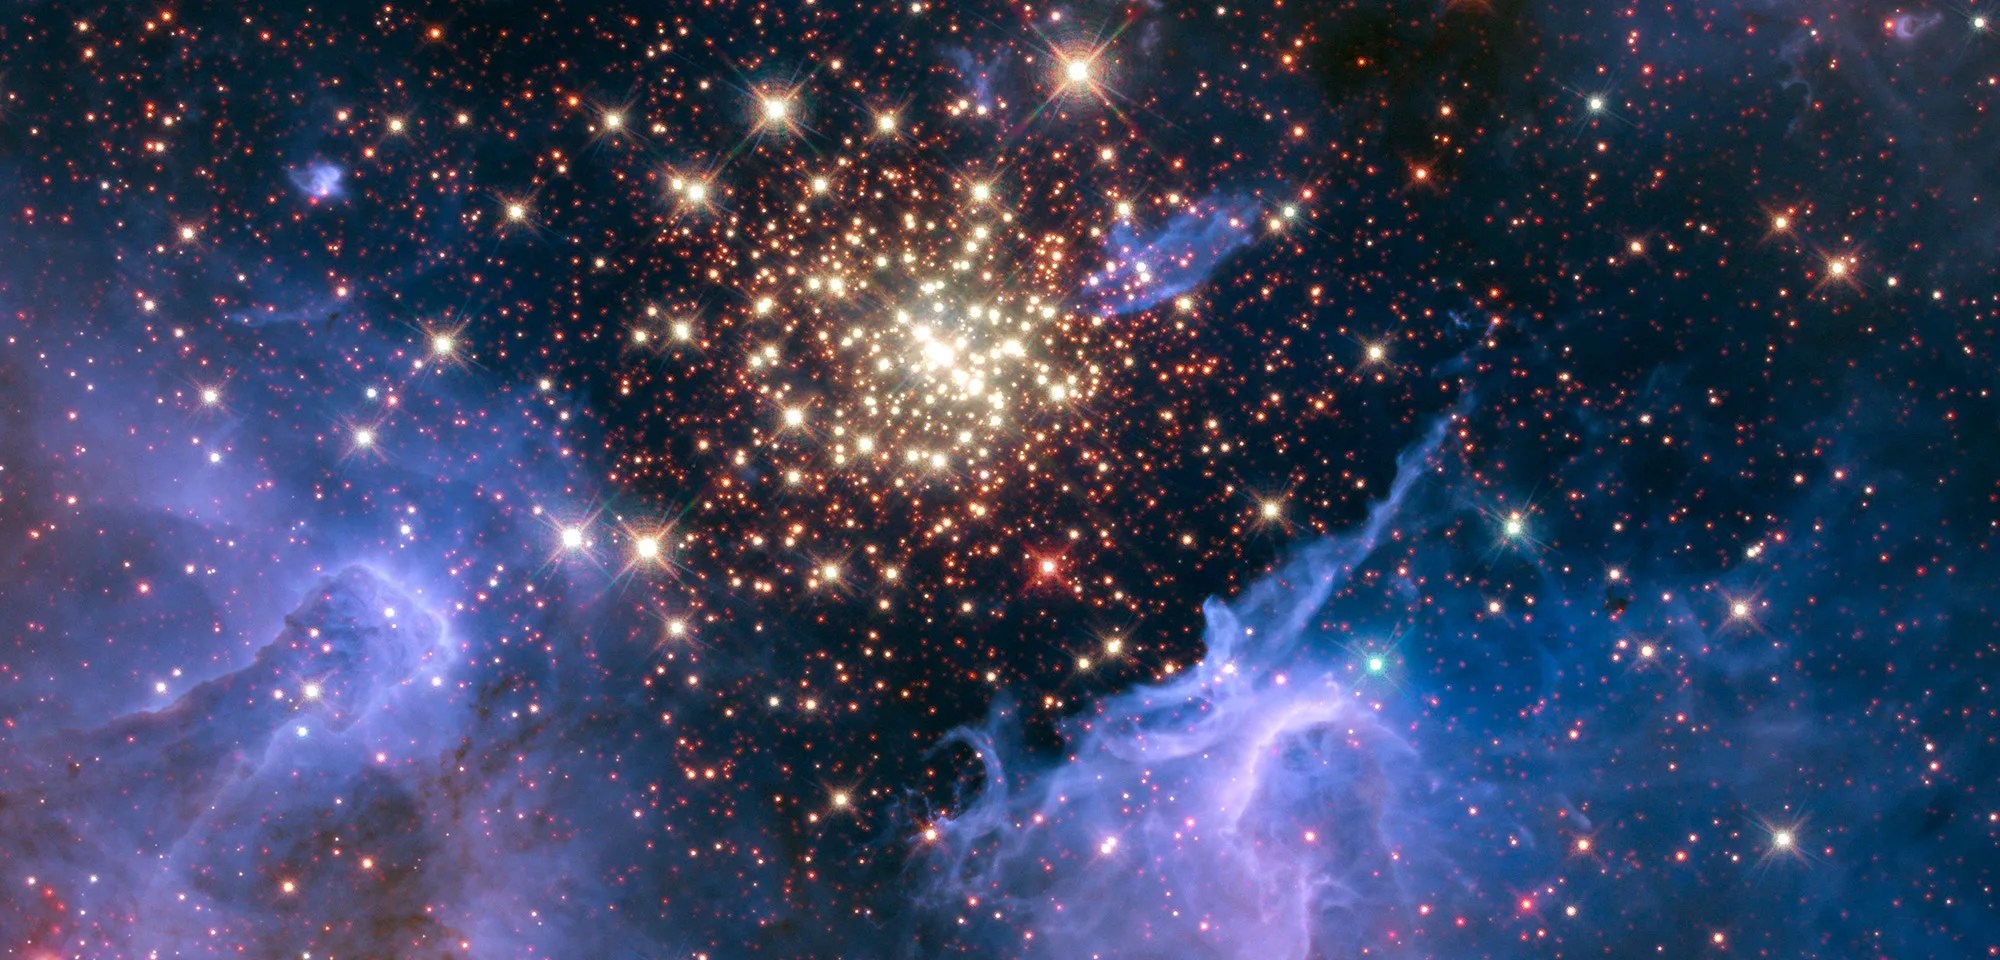 Ngc 3603, a nebula in the constellation carina